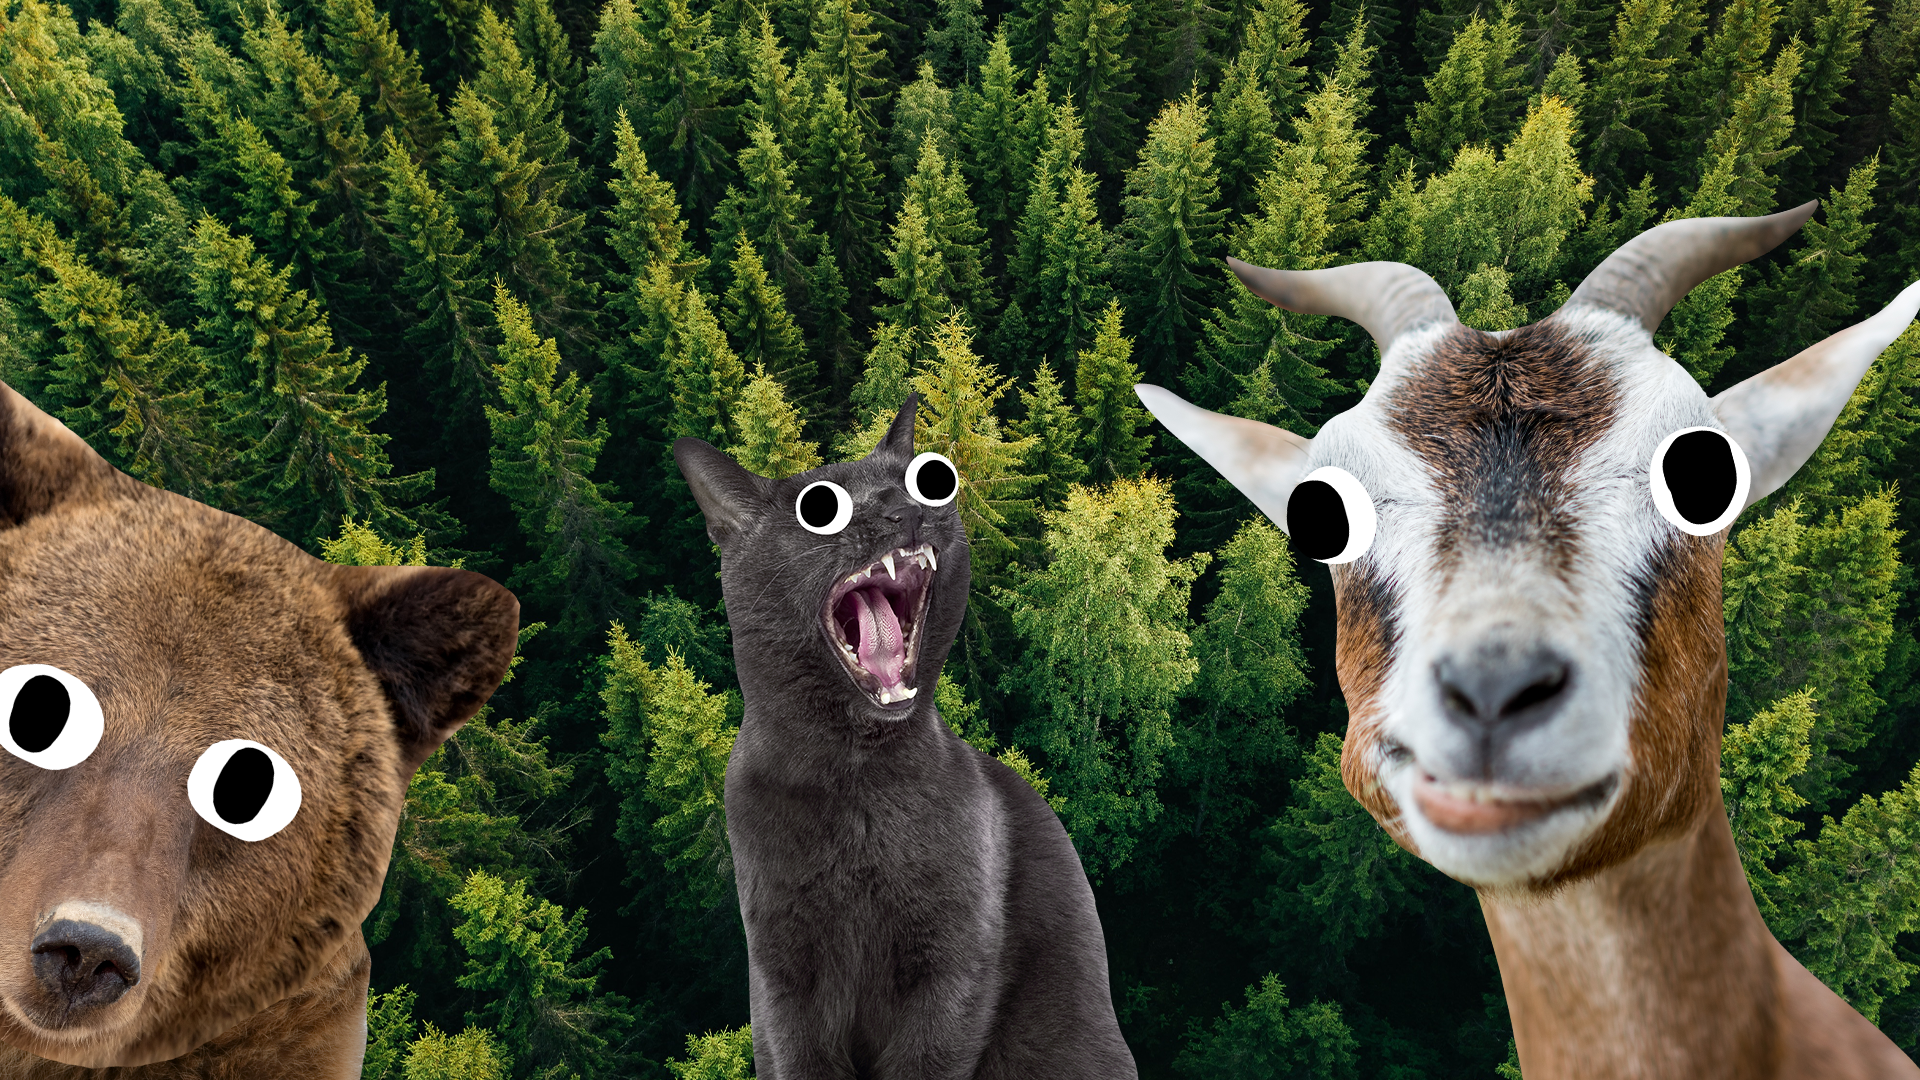 Bear, cat and goat on tree background